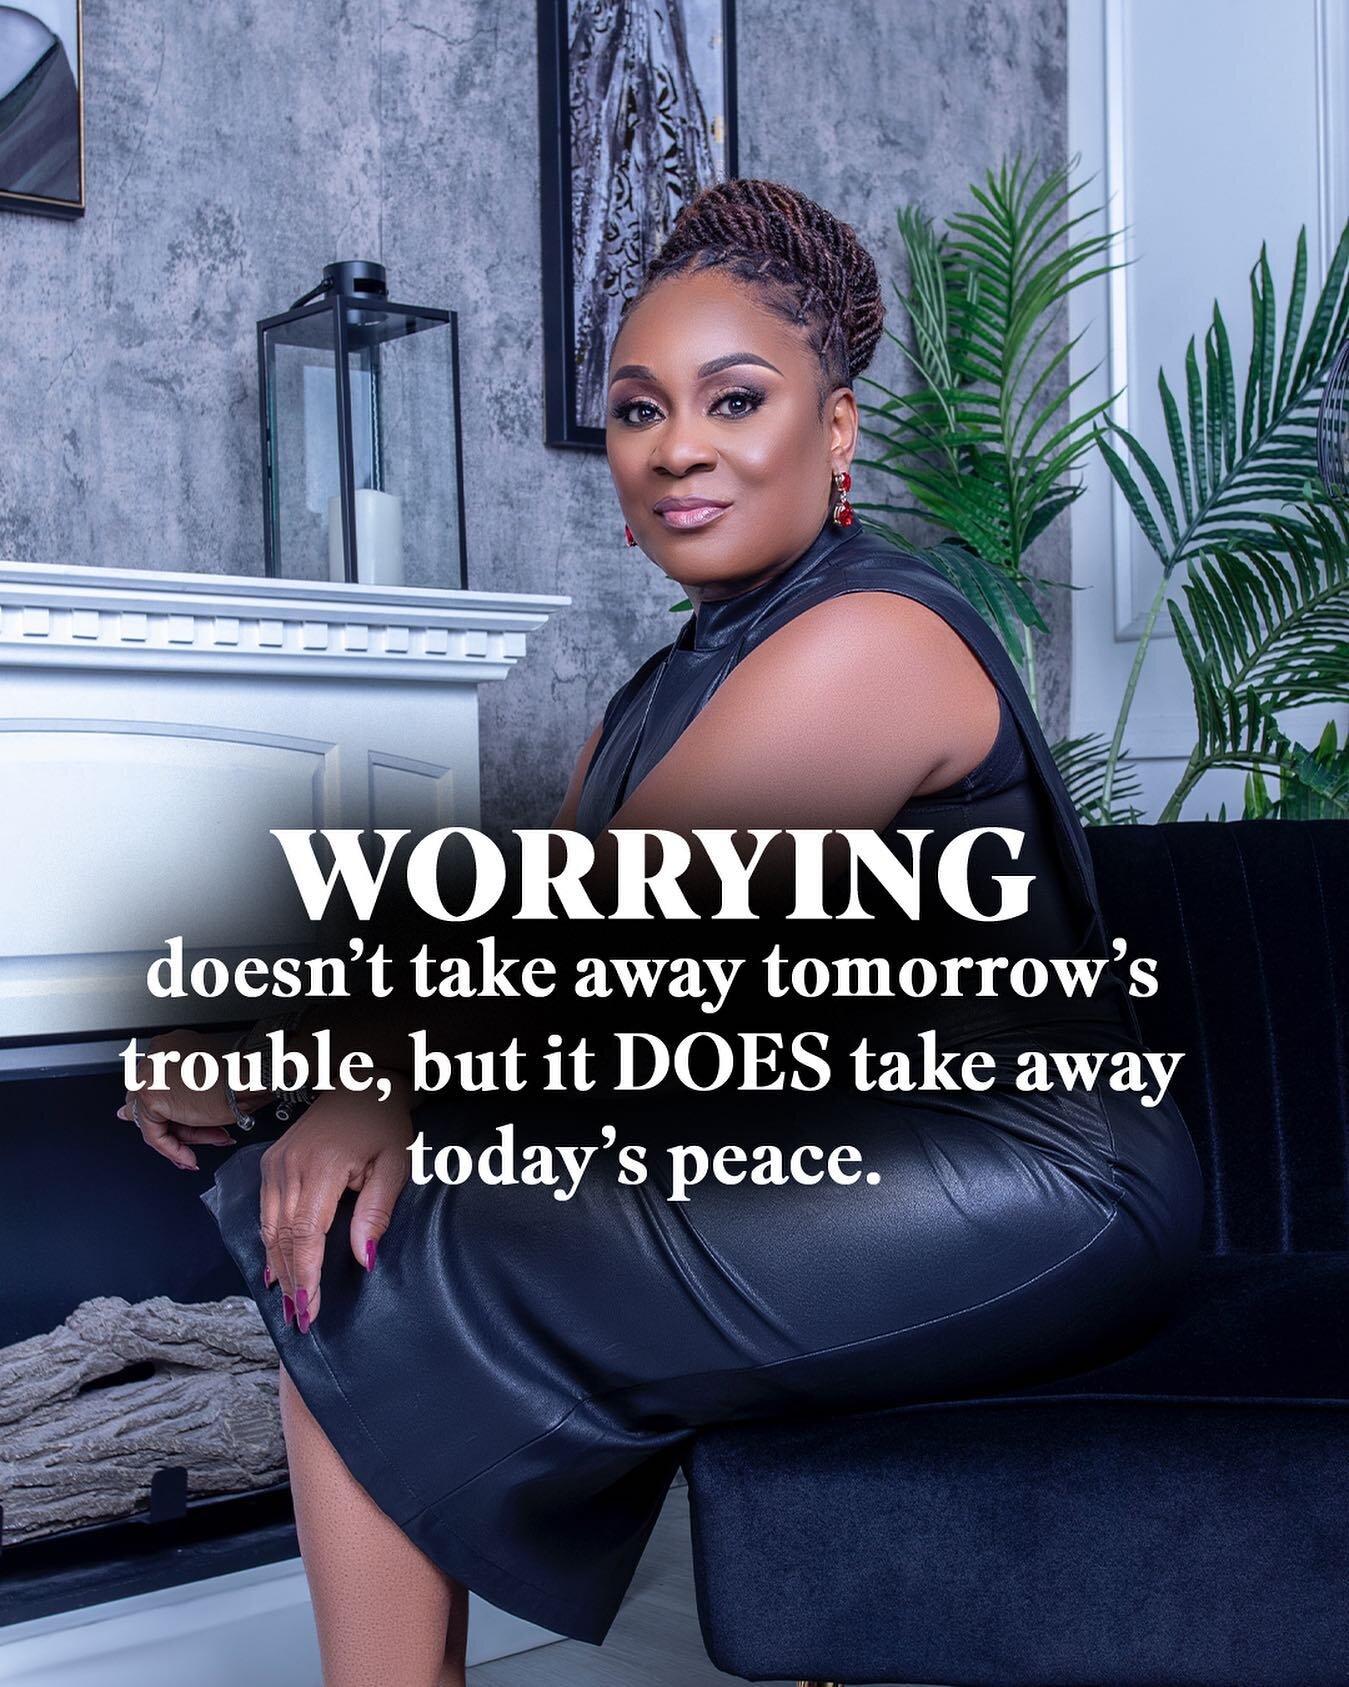 Don't let worry steal your peace today!

The real estate market, like life, has its ups and downs. But in every challenge, there's an opportunity to grow. 📈 This moment could be your turning point. Instead of worrying, embrace hope and take action. 